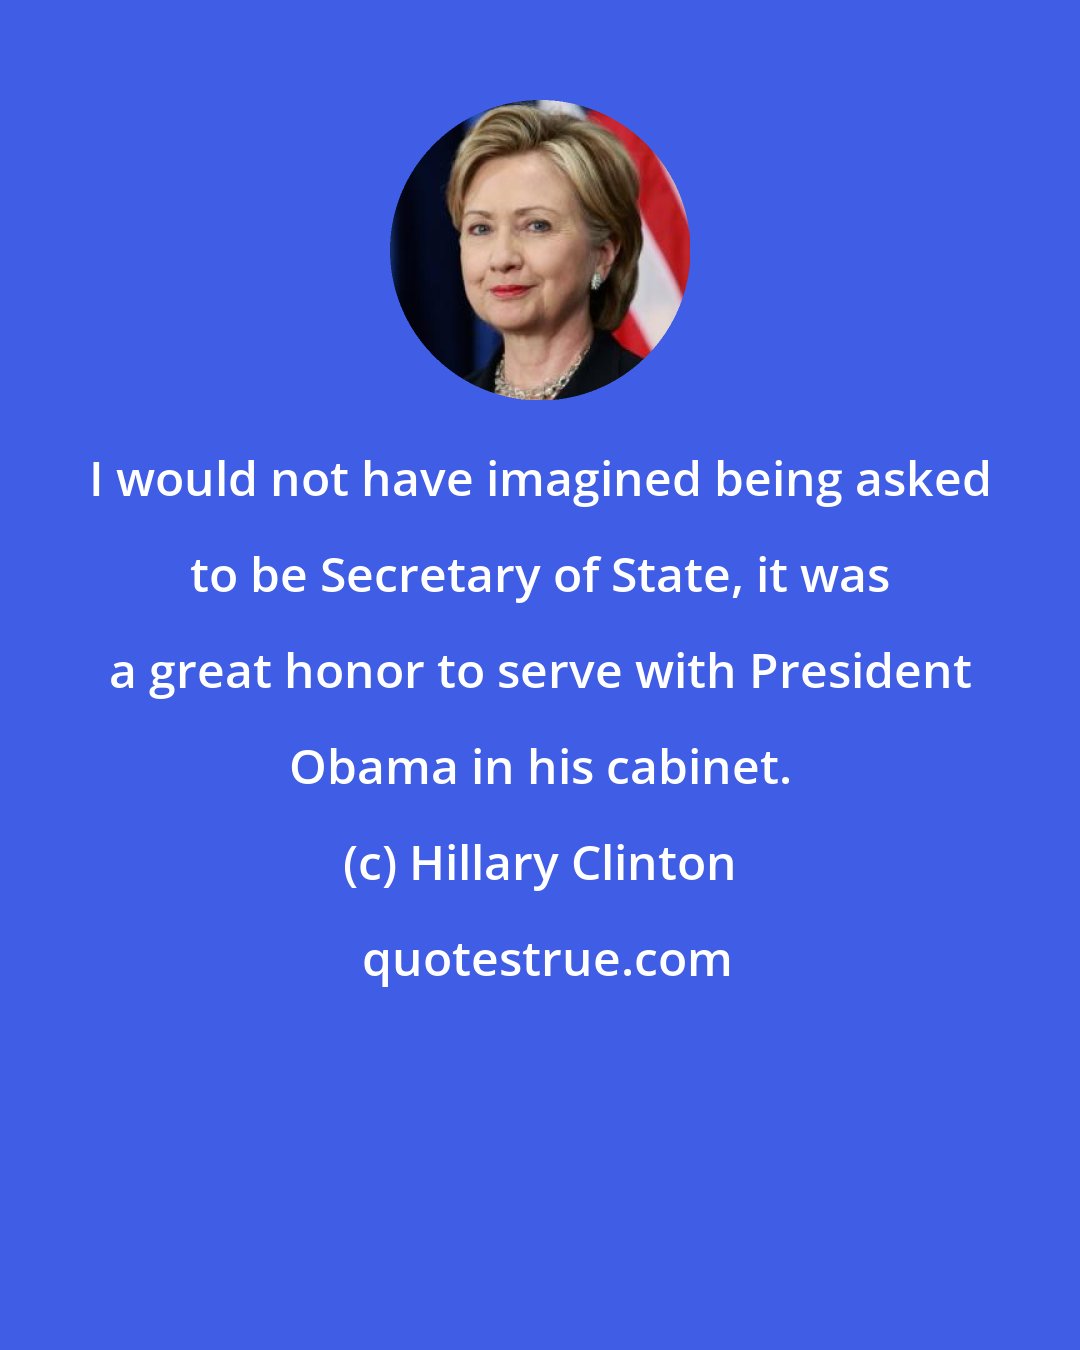 Hillary Clinton: I would not have imagined being asked to be Secretary of State, it was a great honor to serve with President Obama in his cabinet.